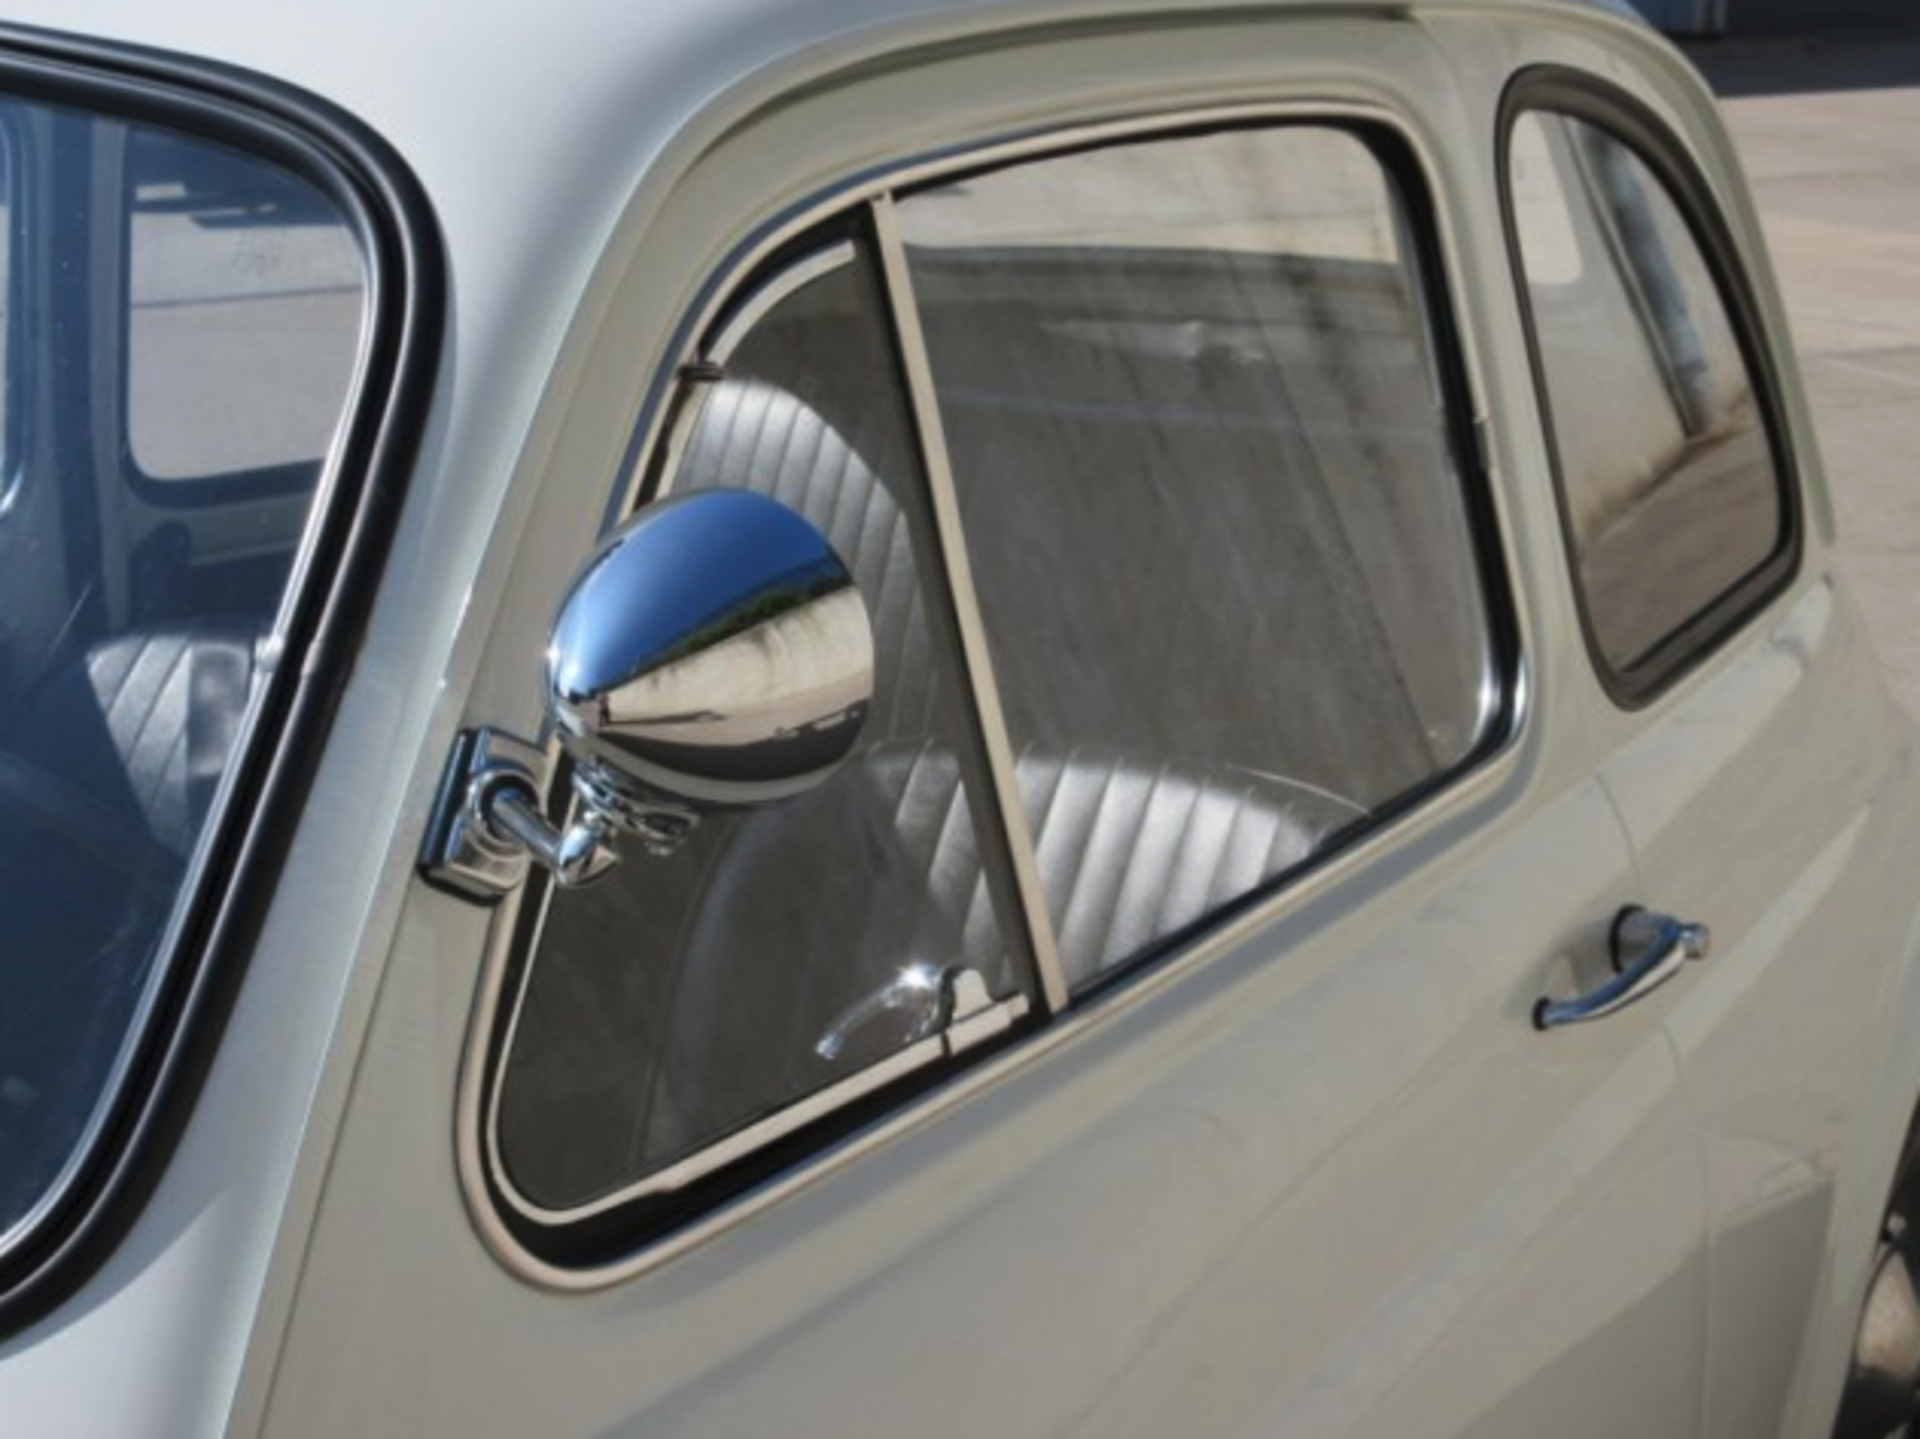 Fiat 500 in White Fully Restored & Detailed - Image 13 of 18